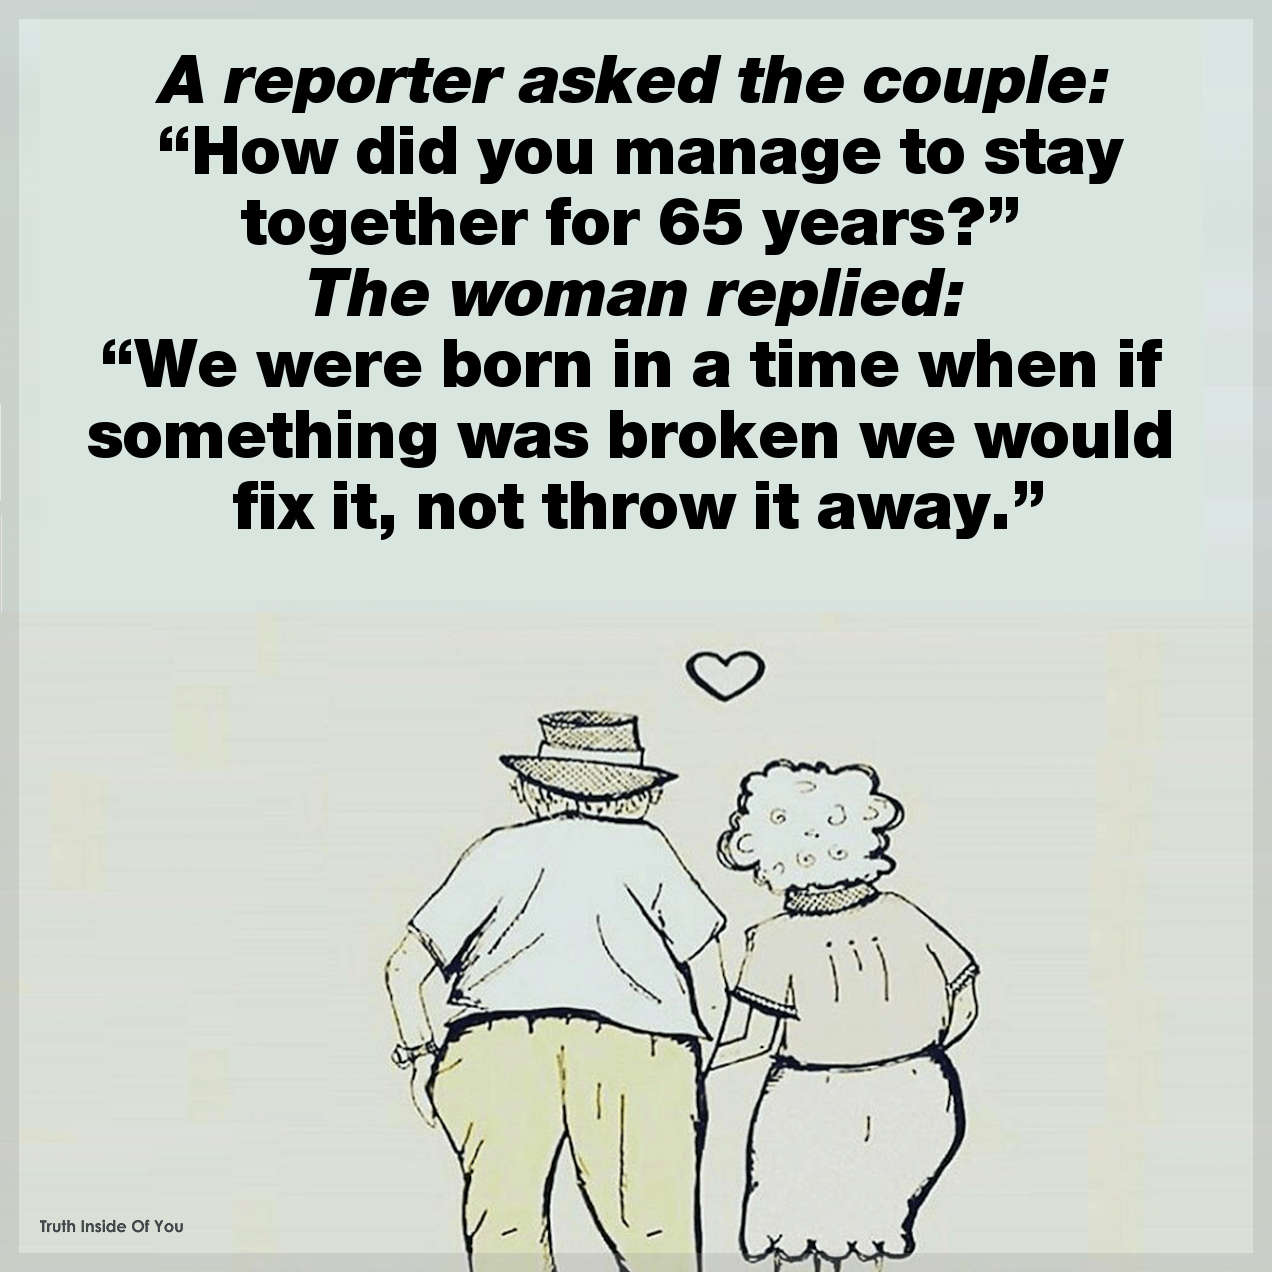 A reporter asked the couple, “How did you manage to stay together for 65 years?” The woman replied, “We were born in a time when if something was broken we would fix it, not throw it away.”